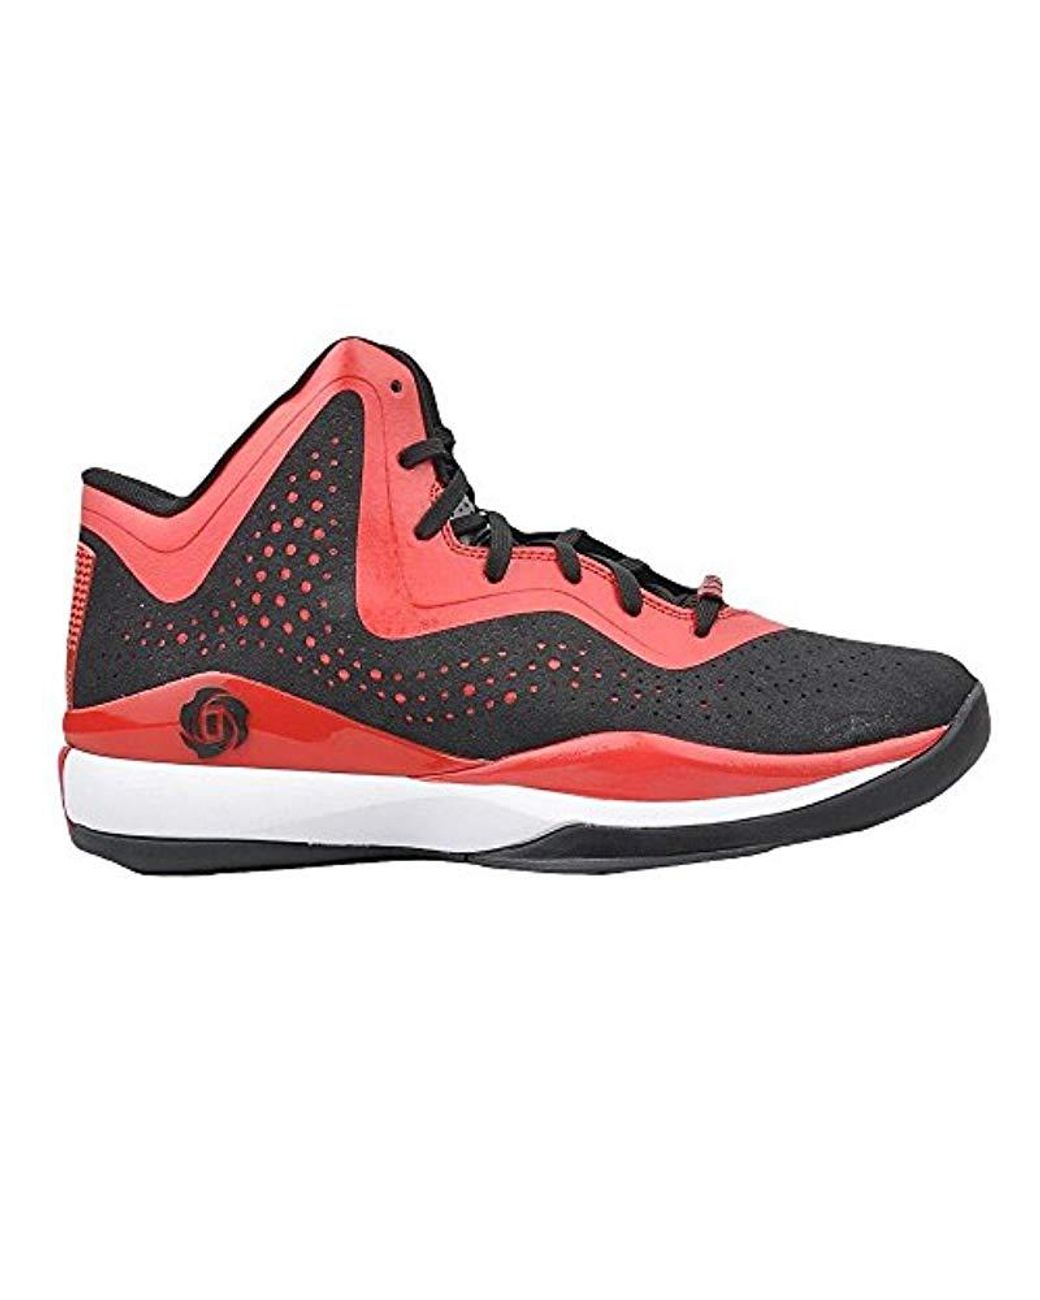 projector composiet Oven adidas Performance Derrick Rose 773 Ii Black Red Basketball Shoes  Sprintframe for Men | Lyst UK